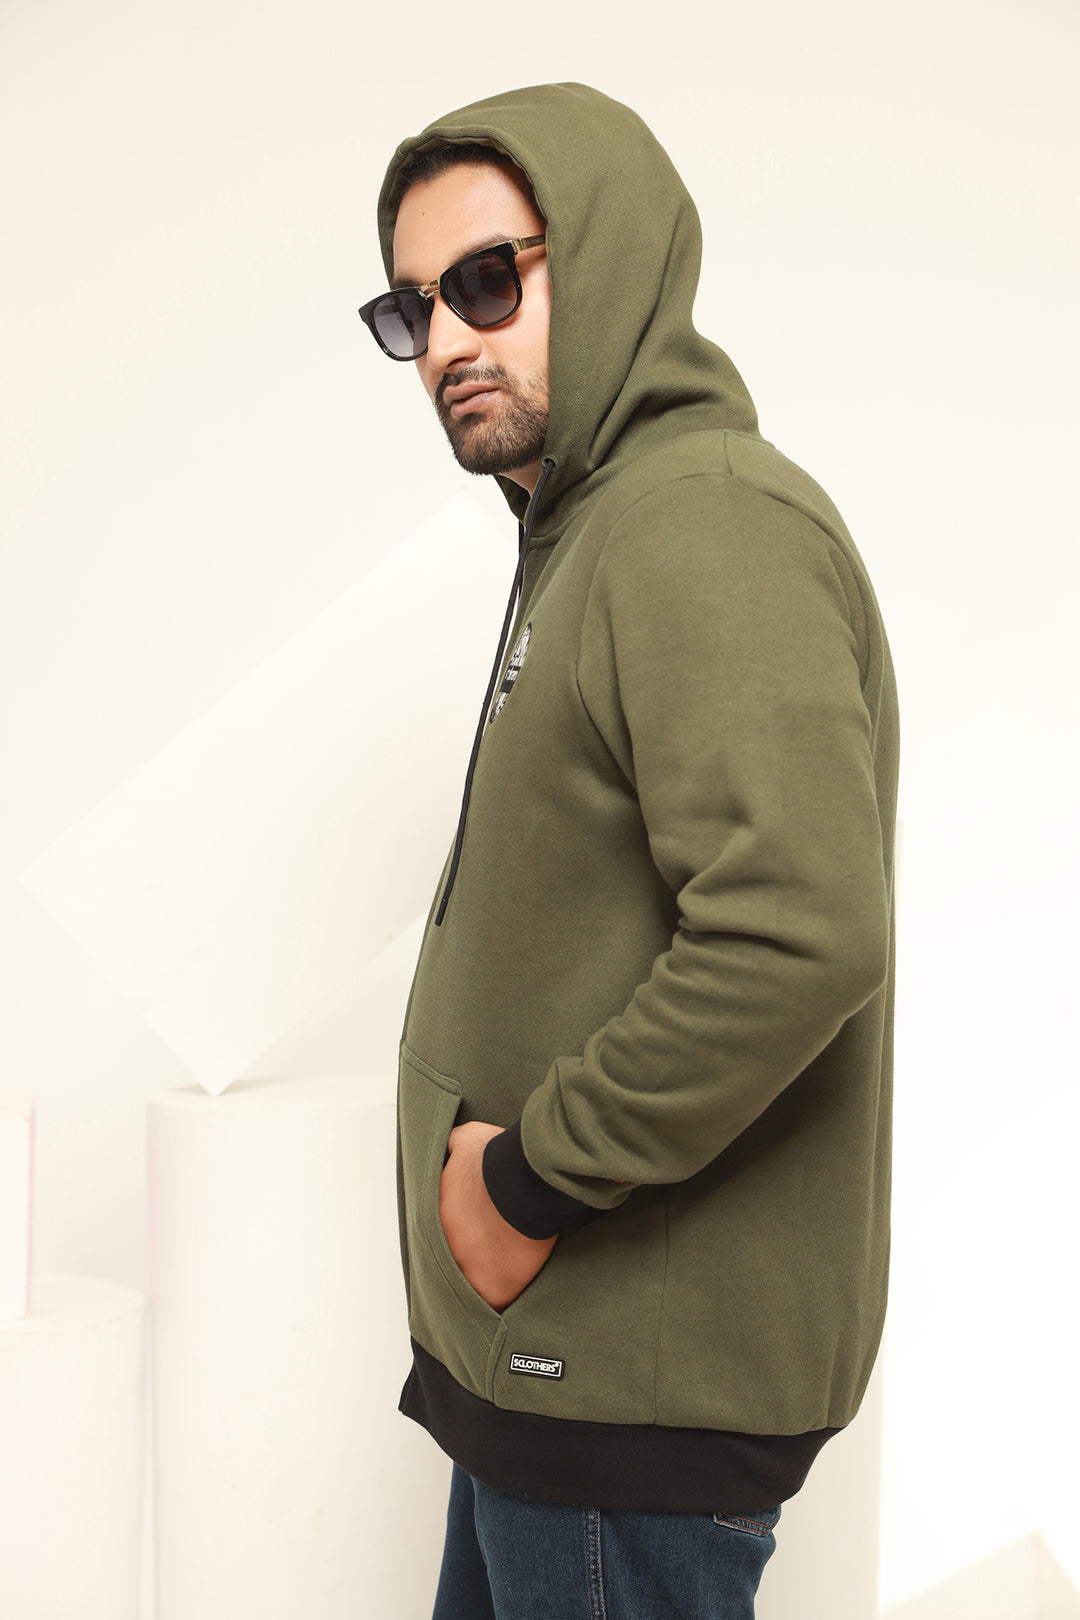 Plus Size Embroidery Hoodies in Pakistan